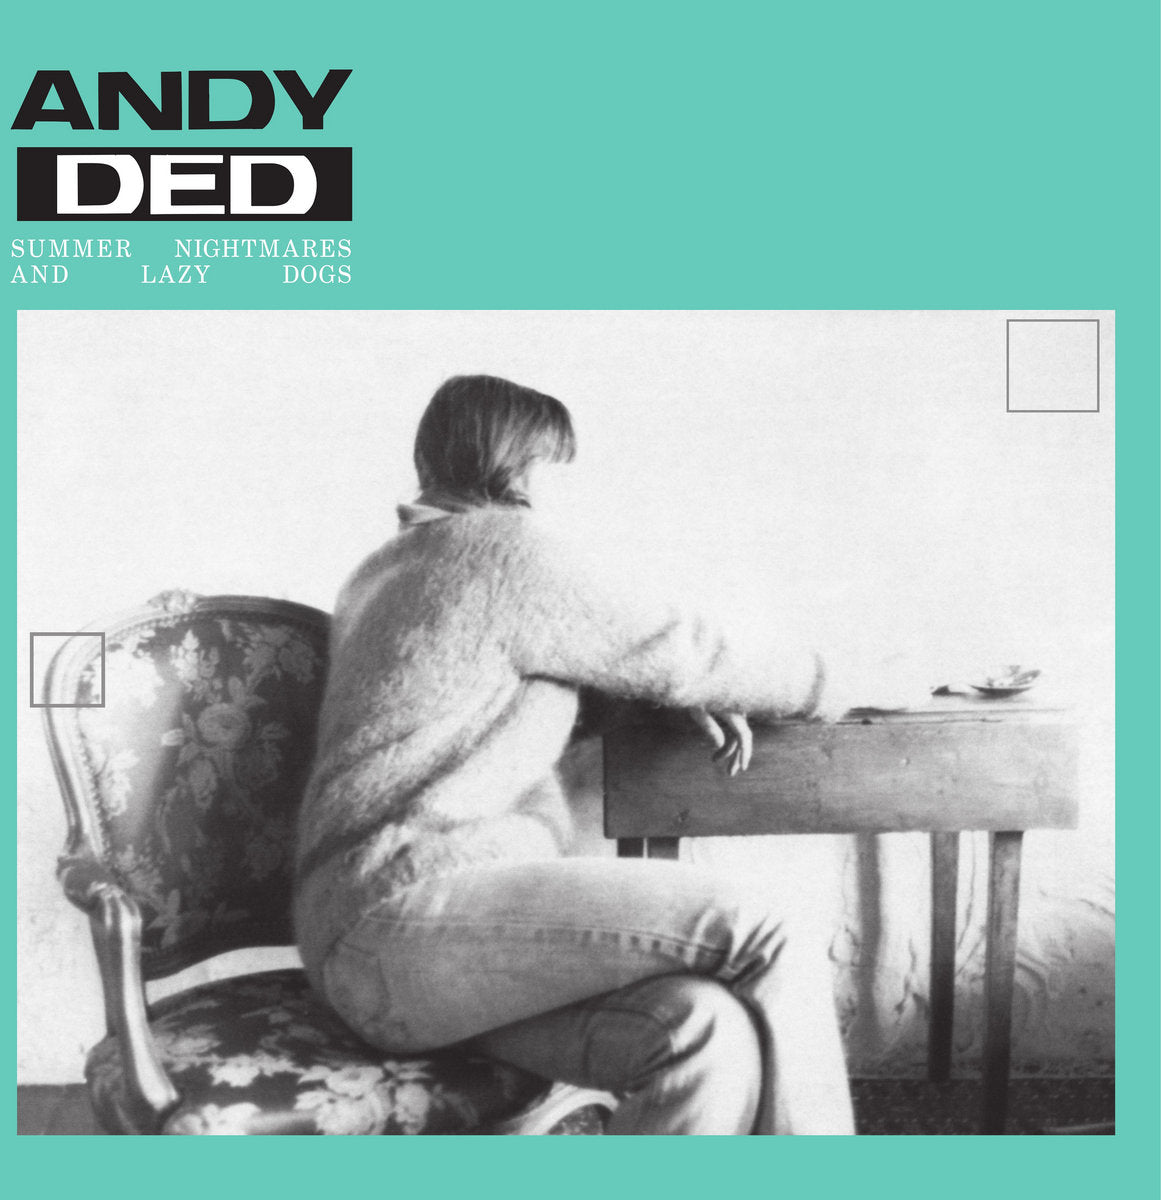 Andy Ded – Summer Nightmares And Lazy Dogs 12"